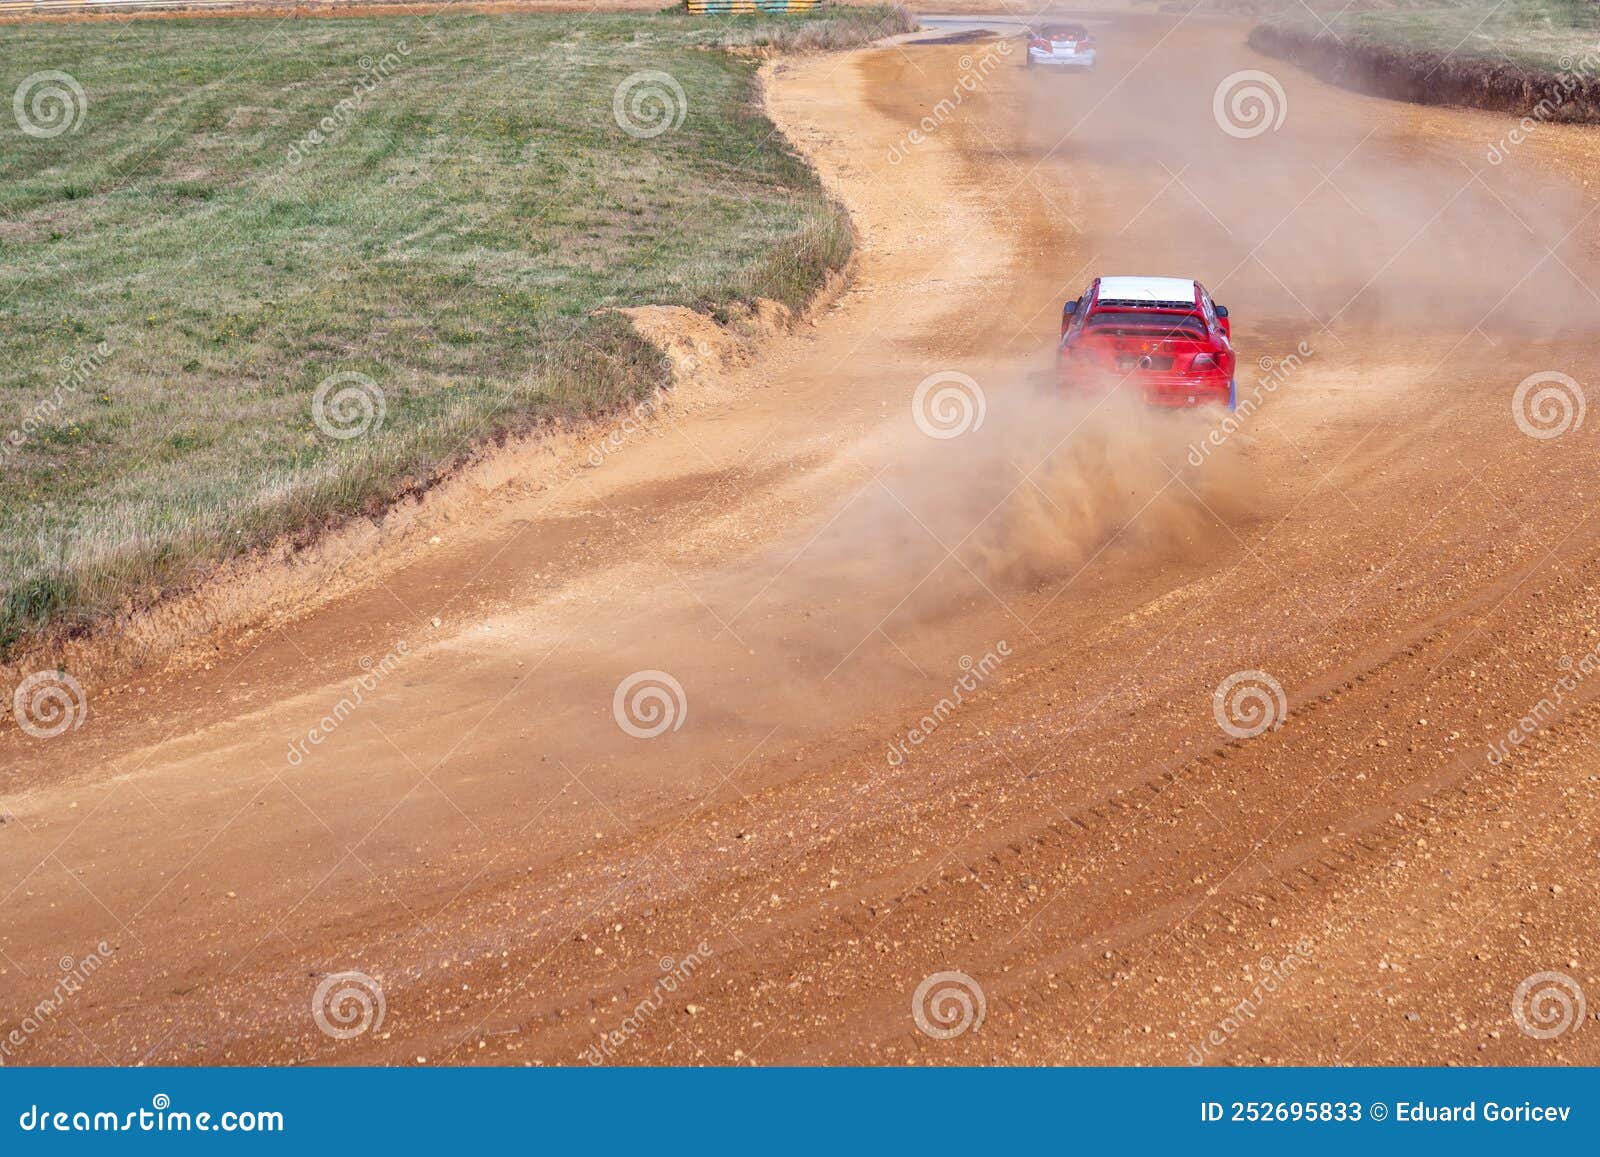 gran turismo races on the autocross track, skidding, dust and dirt from under the tires